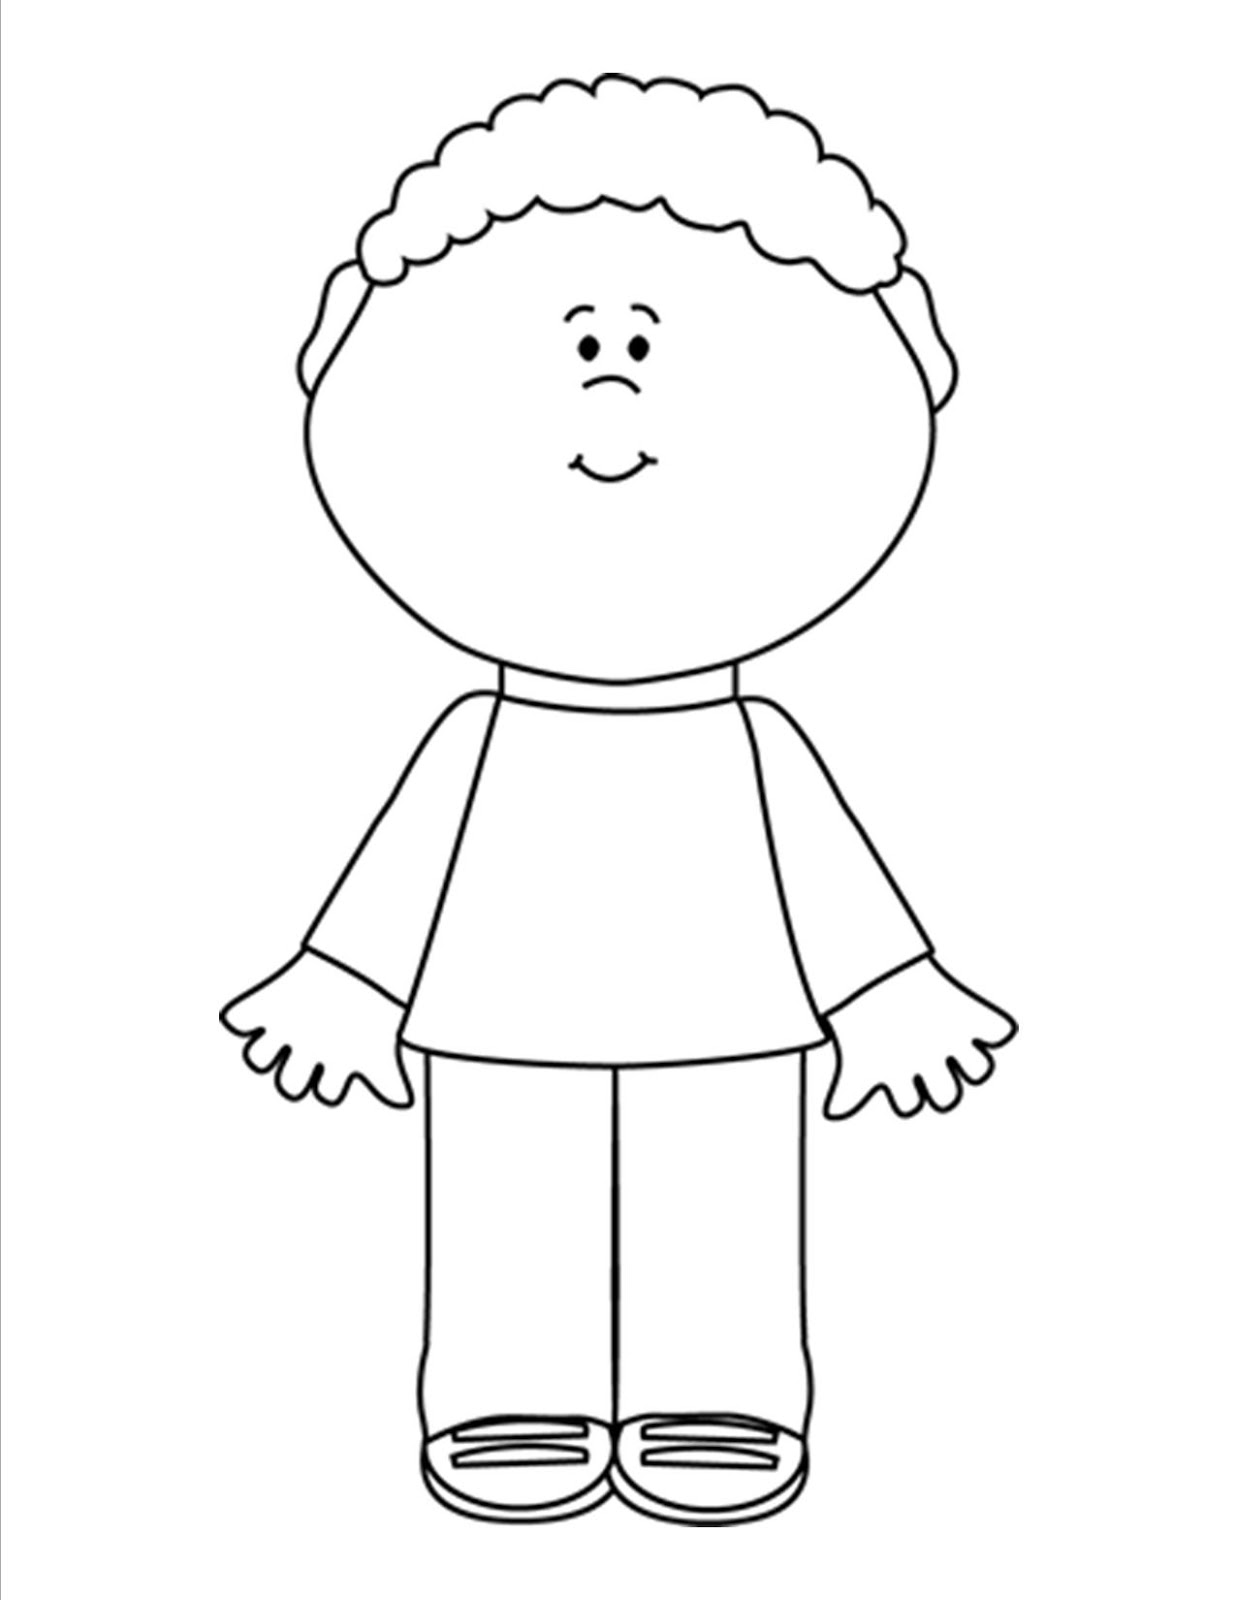 Black and white clipart boy with flashlight 